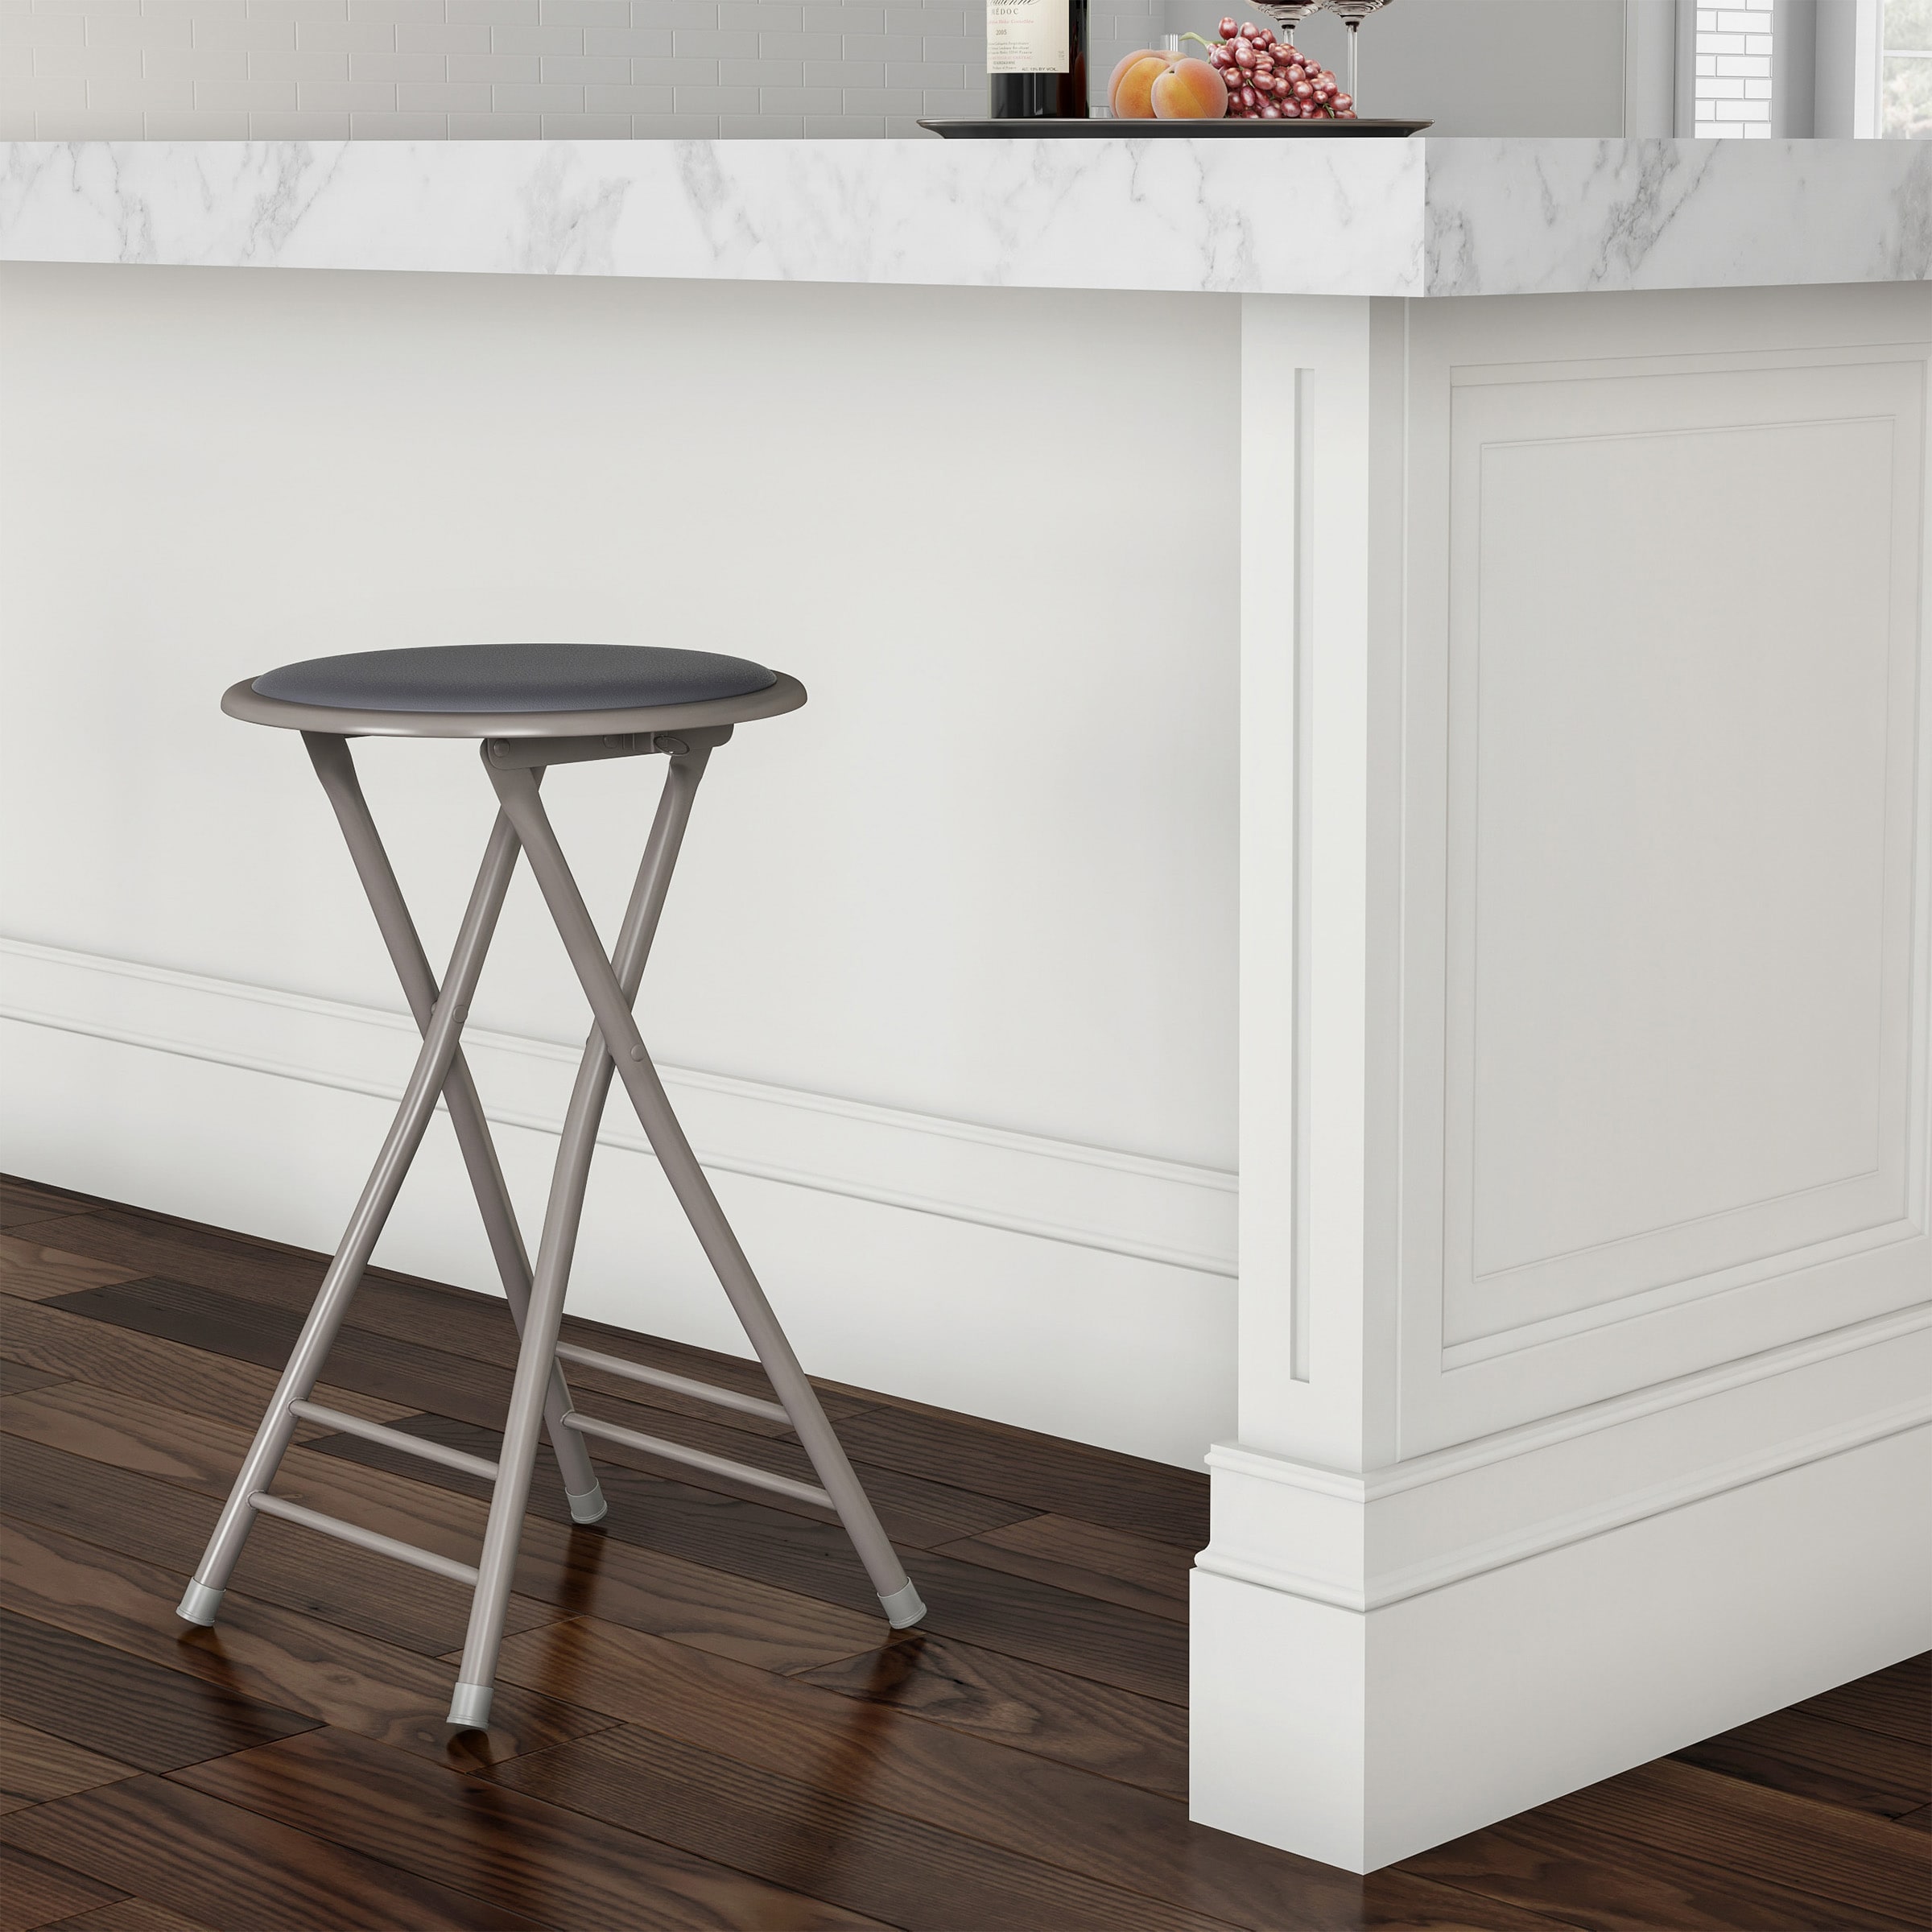 Upholstered Bar Stool In The Stools, Bar And Bar Stools For Home